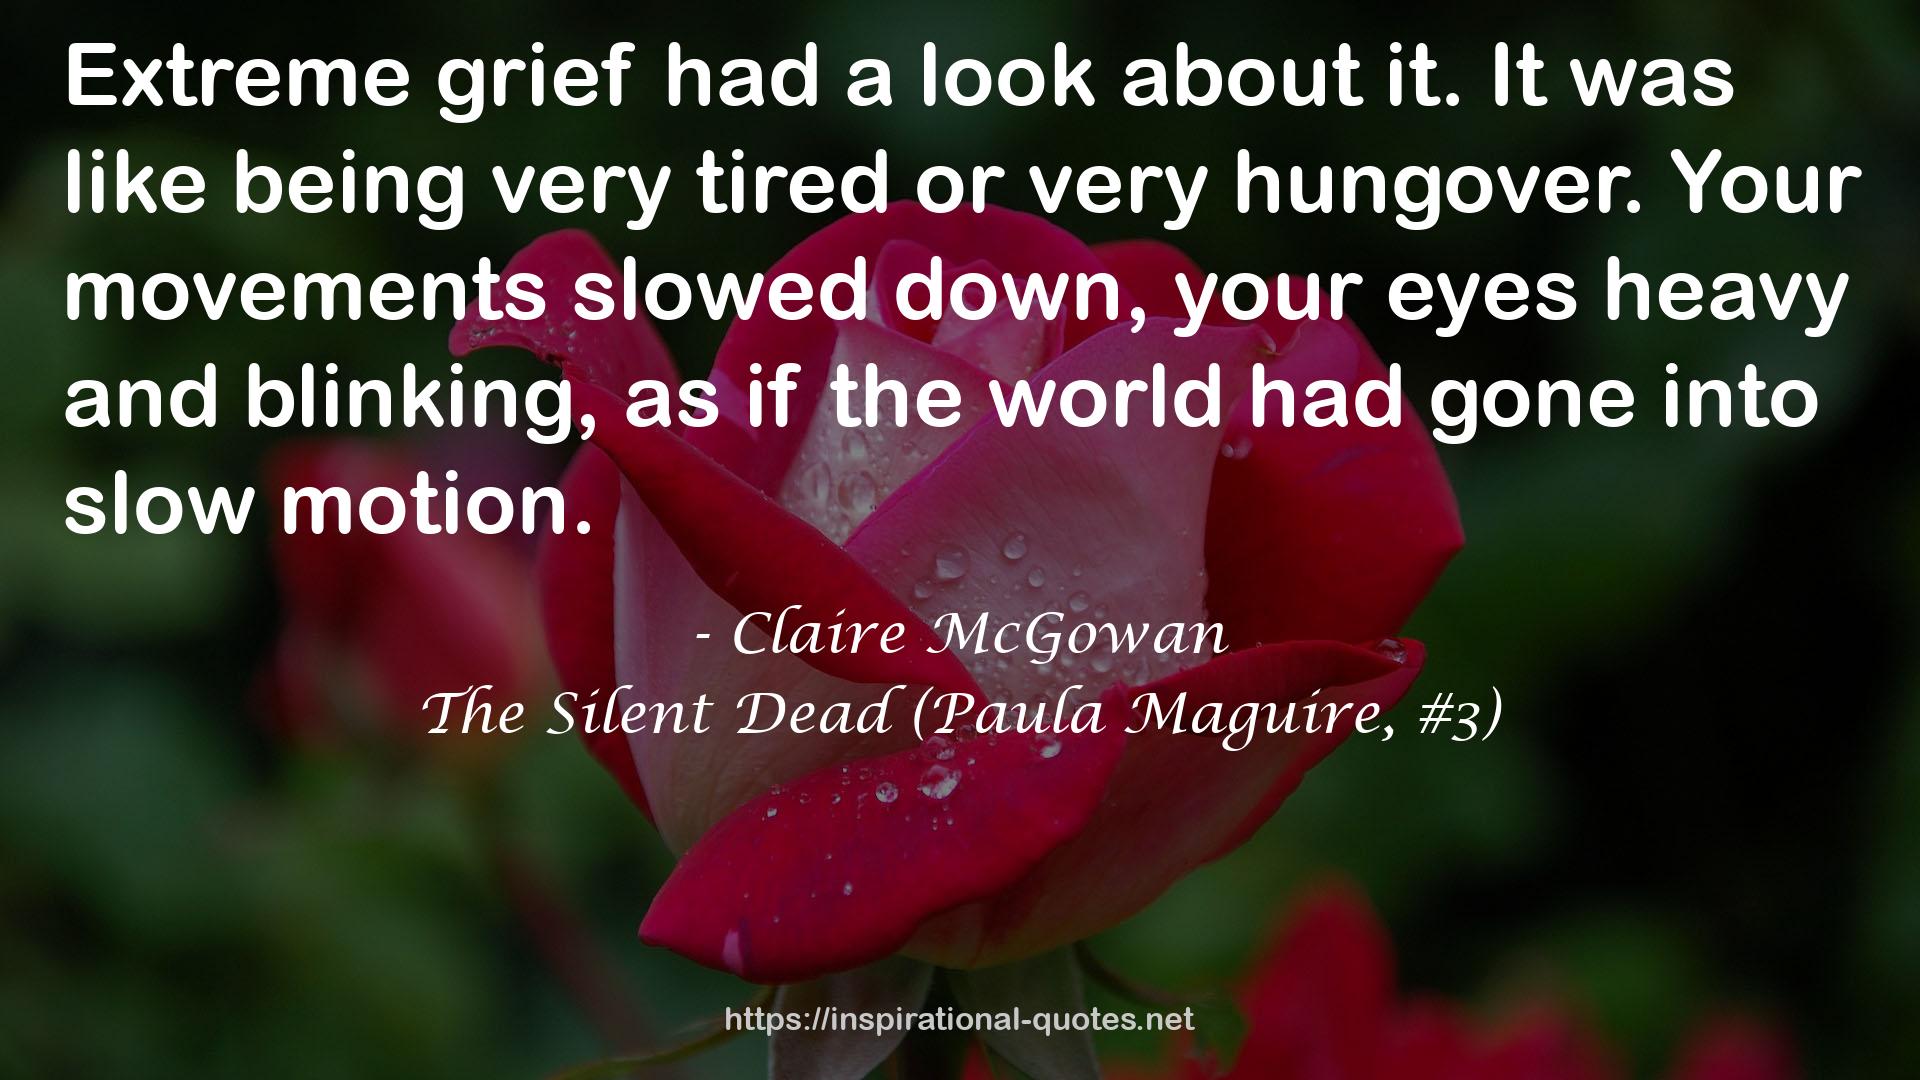 The Silent Dead (Paula Maguire, #3) QUOTES